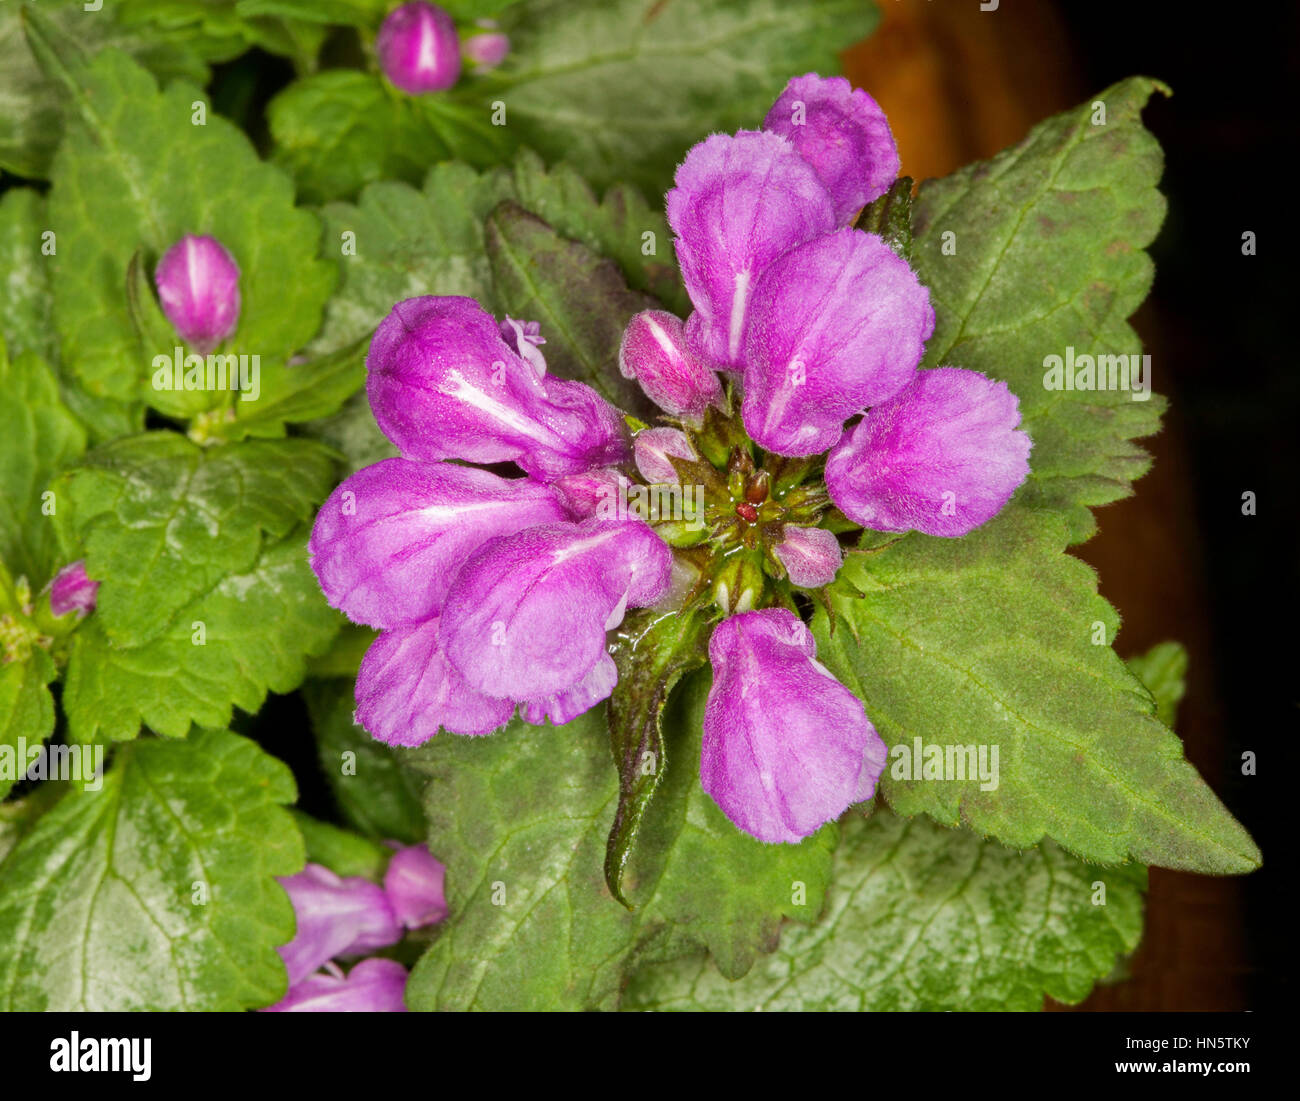 Mauve / pink flowers of ground cover / rockery plant Lamium maculatum 'Beacon Silver' surrounded by light green heart-shaped leaves on dark background Stock Photo